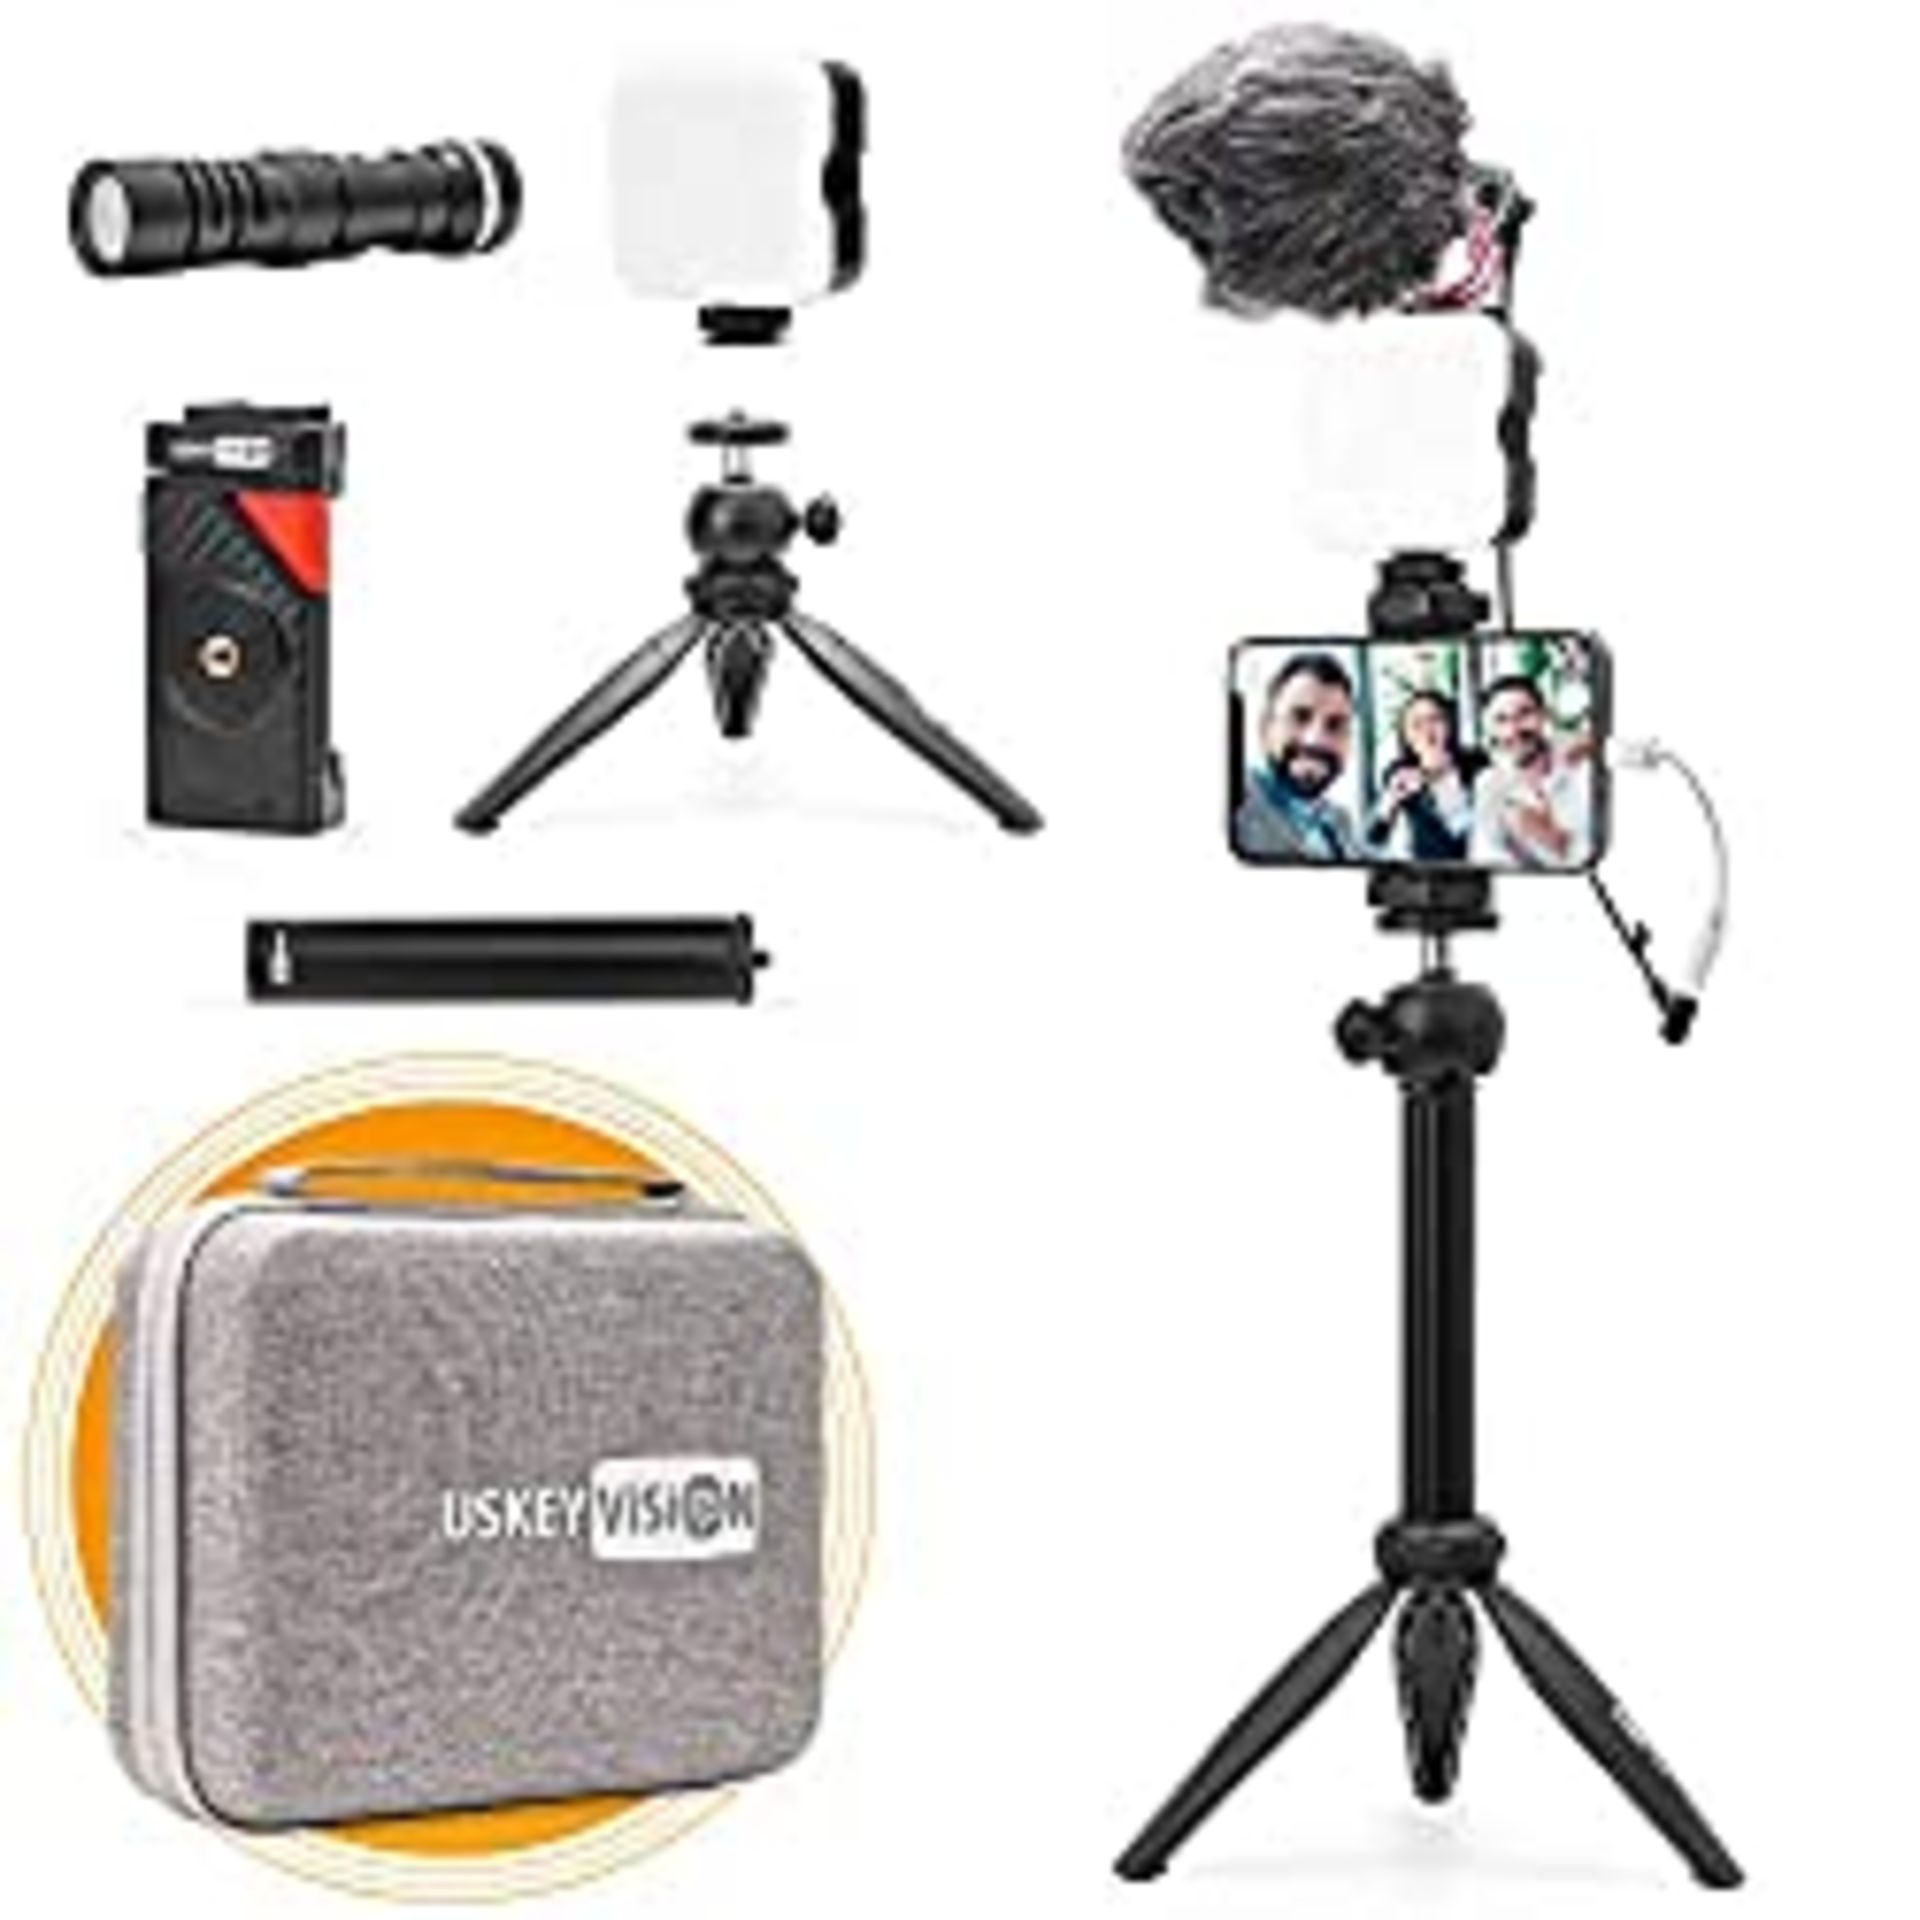 RRP £69.98 USKEYVISION Smartphone Vlogging Kit for Phone Video